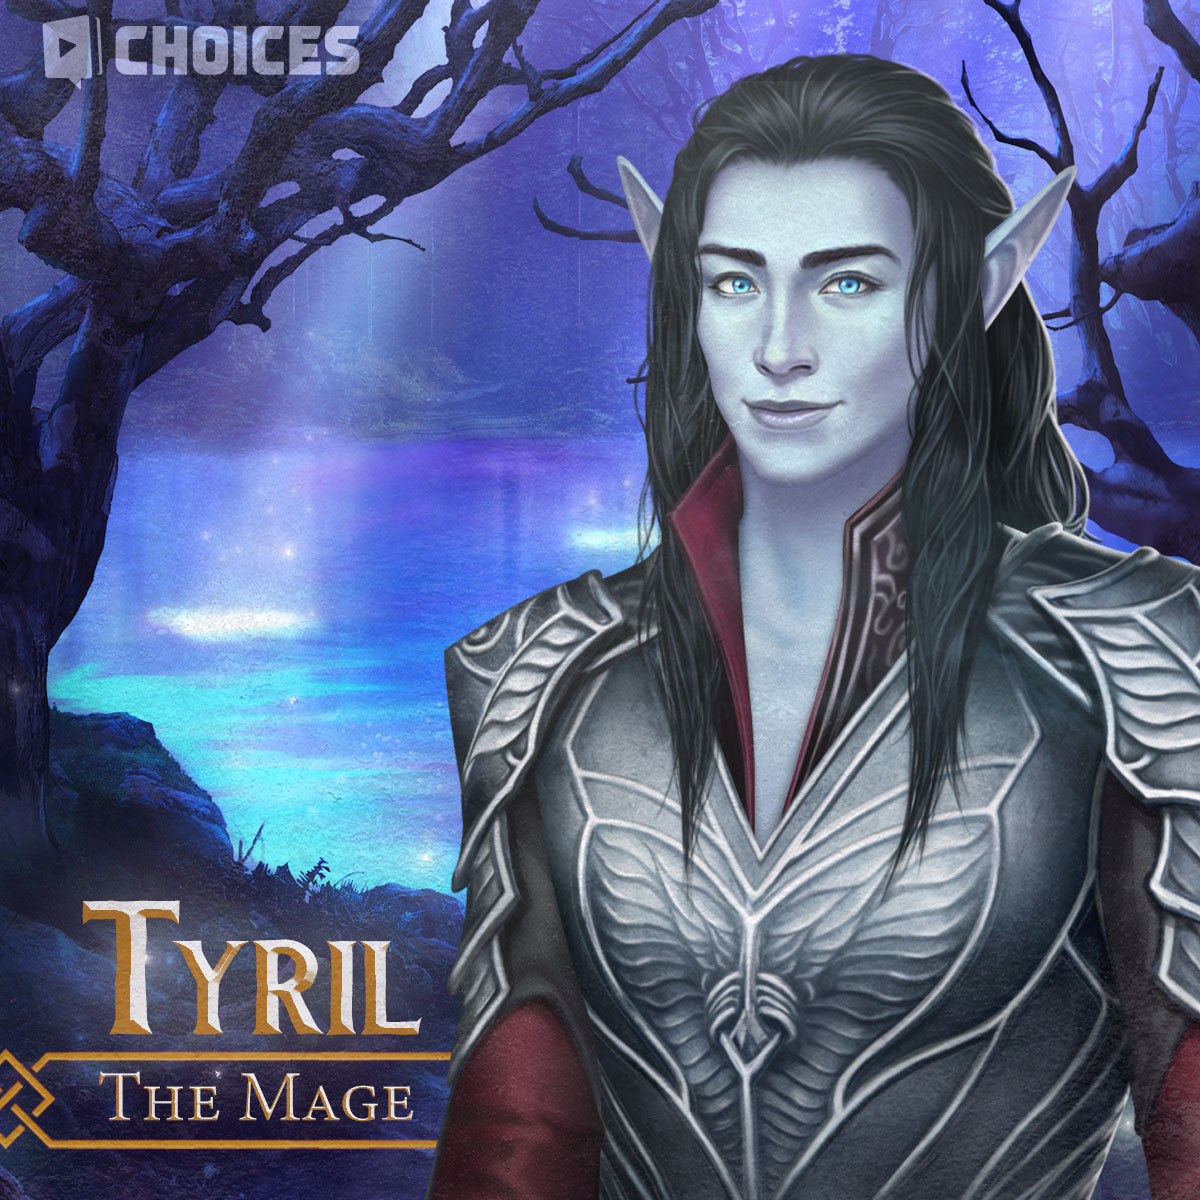 Choices On Twitter Meet Tyril In Blades Of Light And Shadow Help This Brooding Exile In His Quest To Restore His Honor And Banish The Forces Of Darkness Https T Co Grqm9uwmaq Twitter